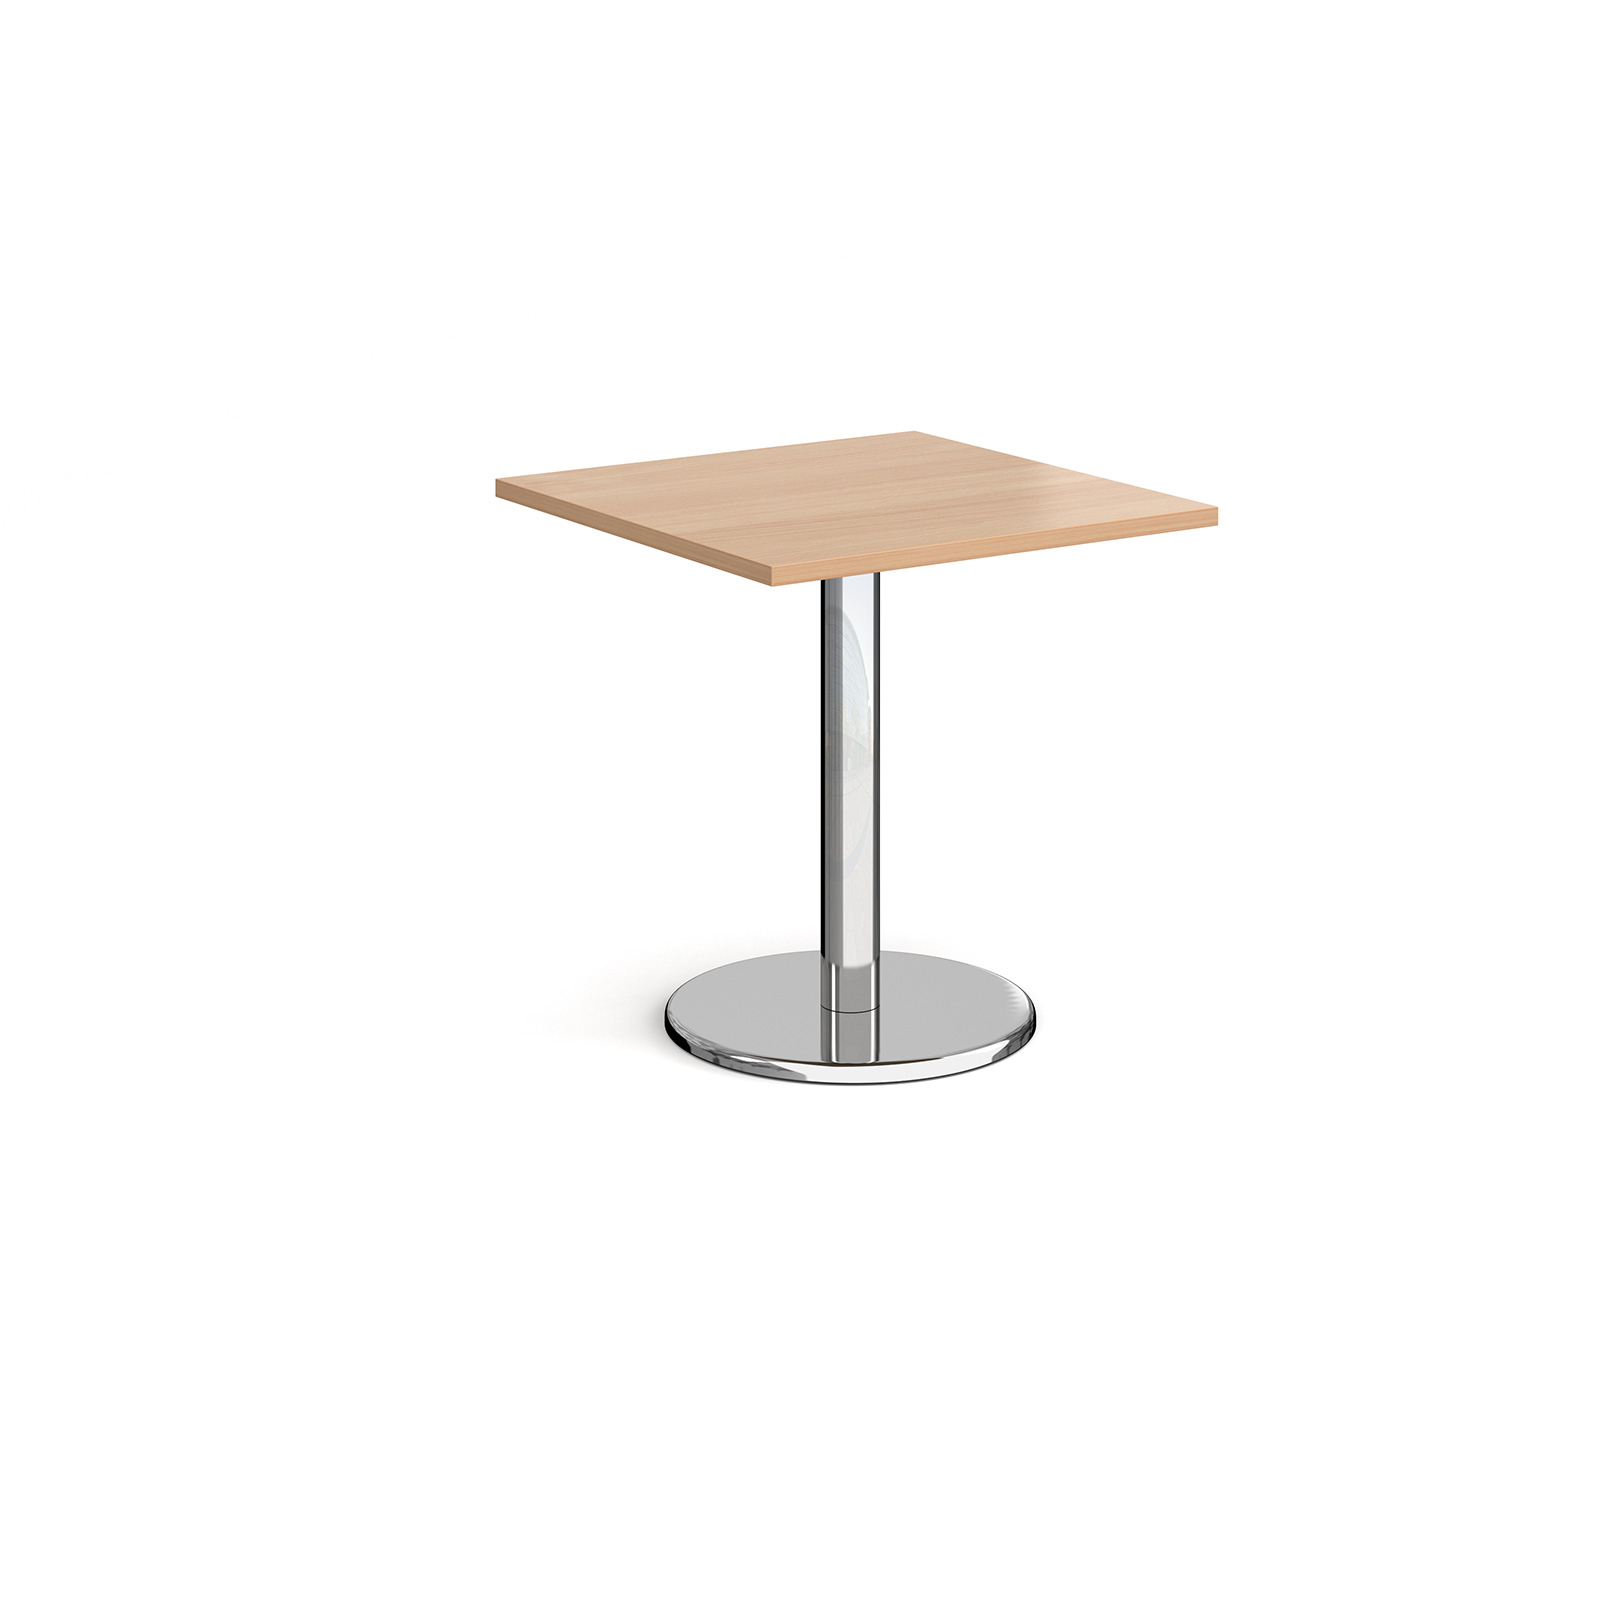 Pisa square dining table with round base